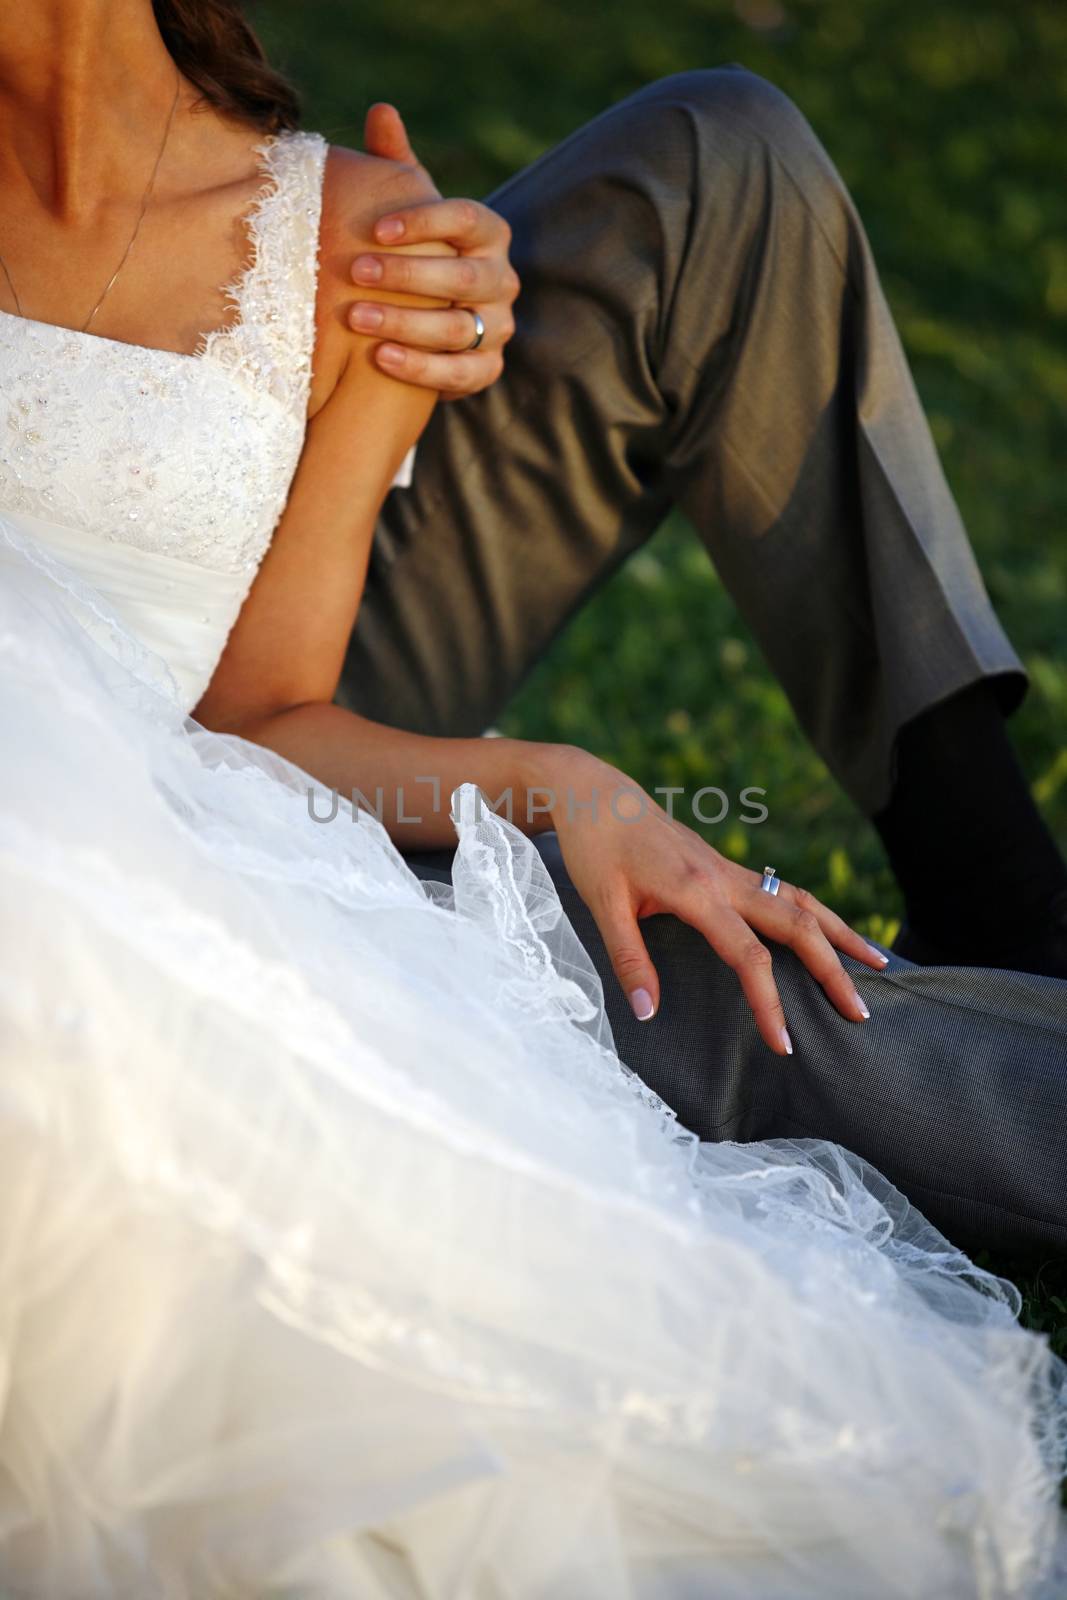 The groom and the bride sit on a grass